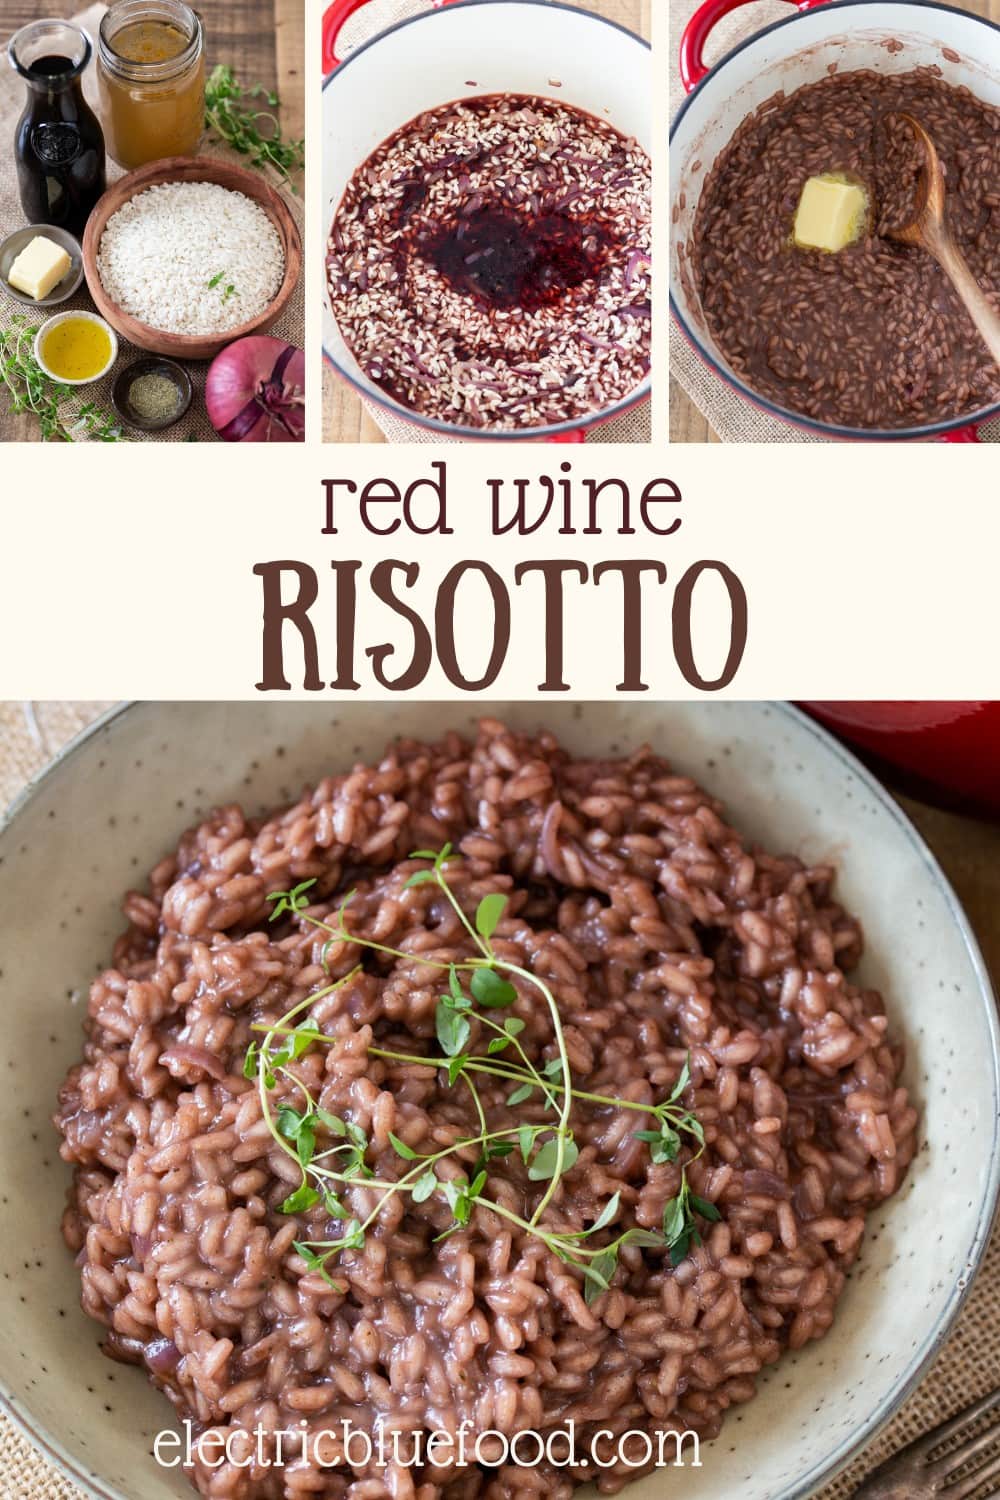 This red wine risotto has no cheese and a deep and rich flavour from the red wine. While the alcohol evaporates, the intense notes of red wine stay behind flavouring this risotto in a delicious way.